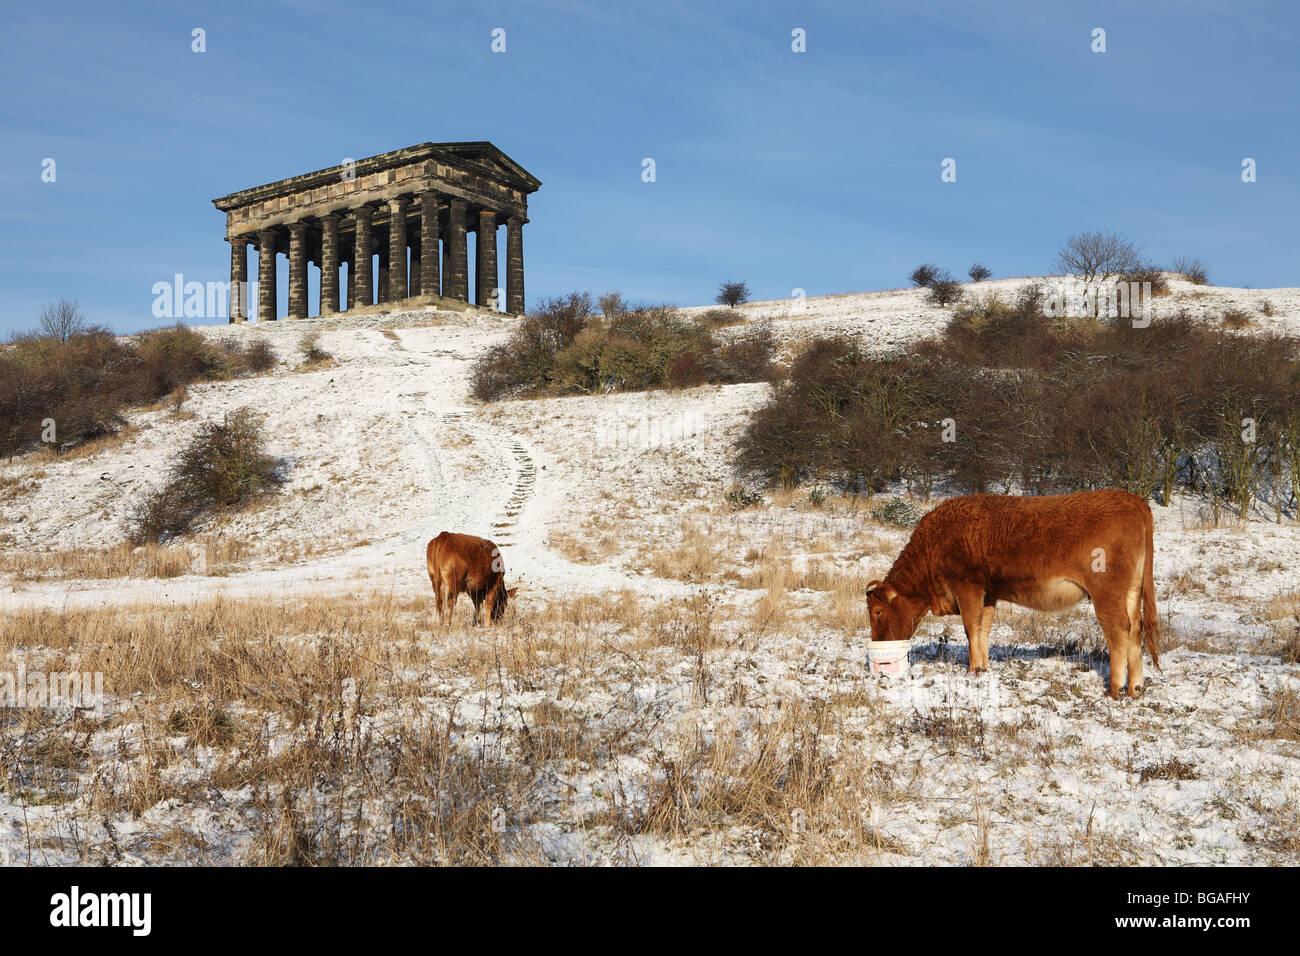 Highland cattle grazing in snow with Penshaw Monument in the background, Sunderland, England, UK Stock Photo